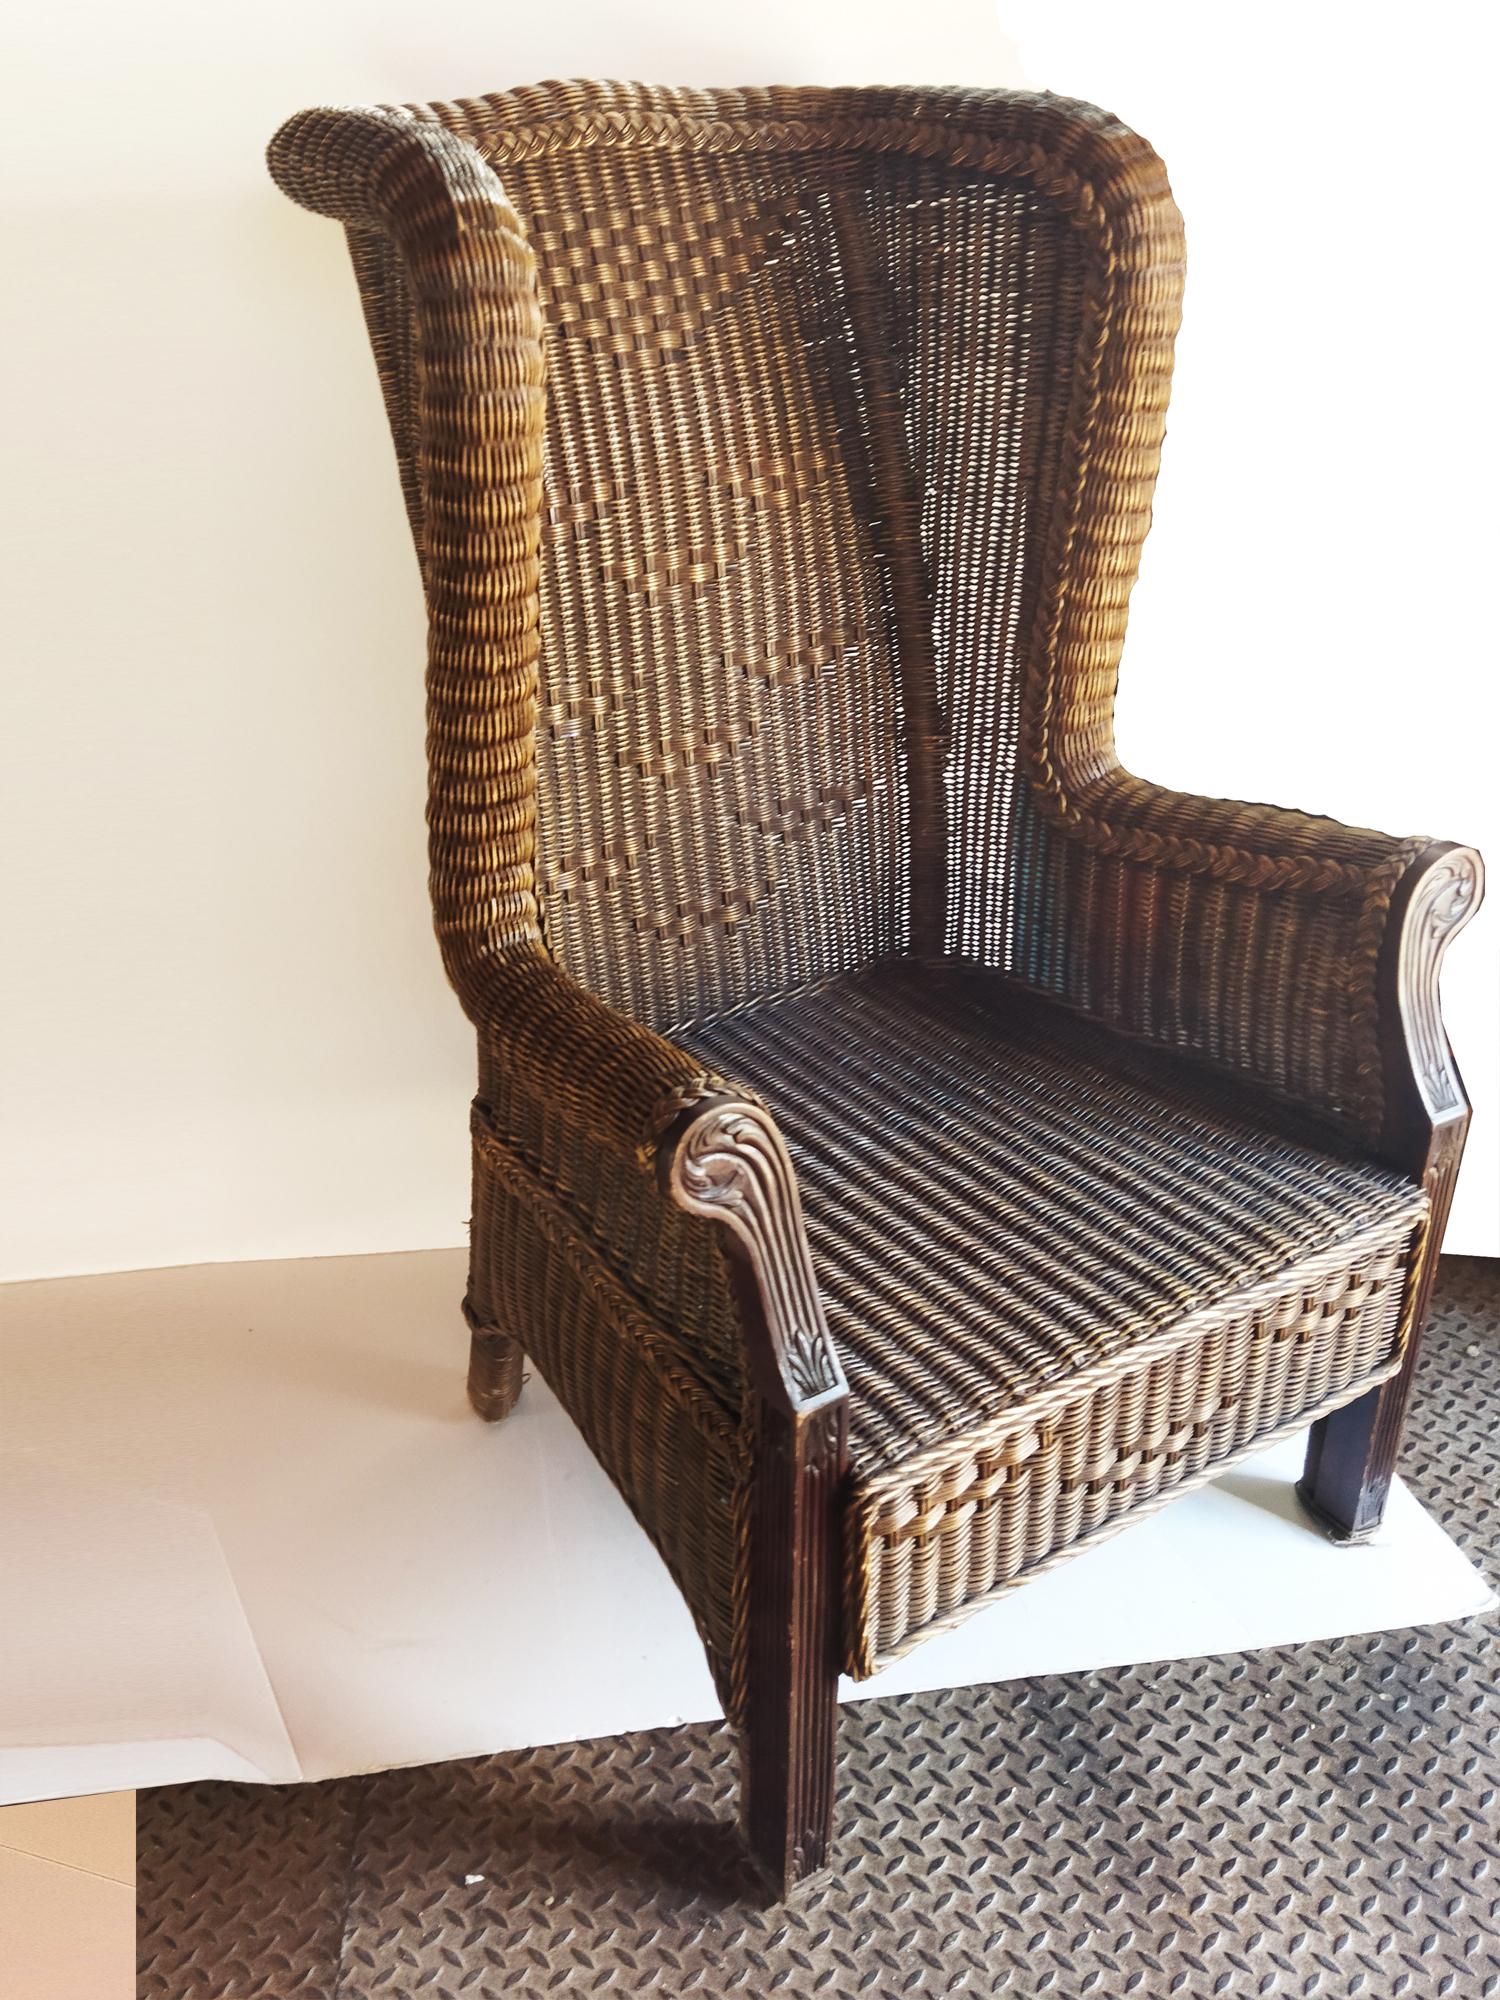 Spanish  Spectacular VictorianStyle  Wicker Throne, Very Big  High Backrest  Wide Seat For Sale